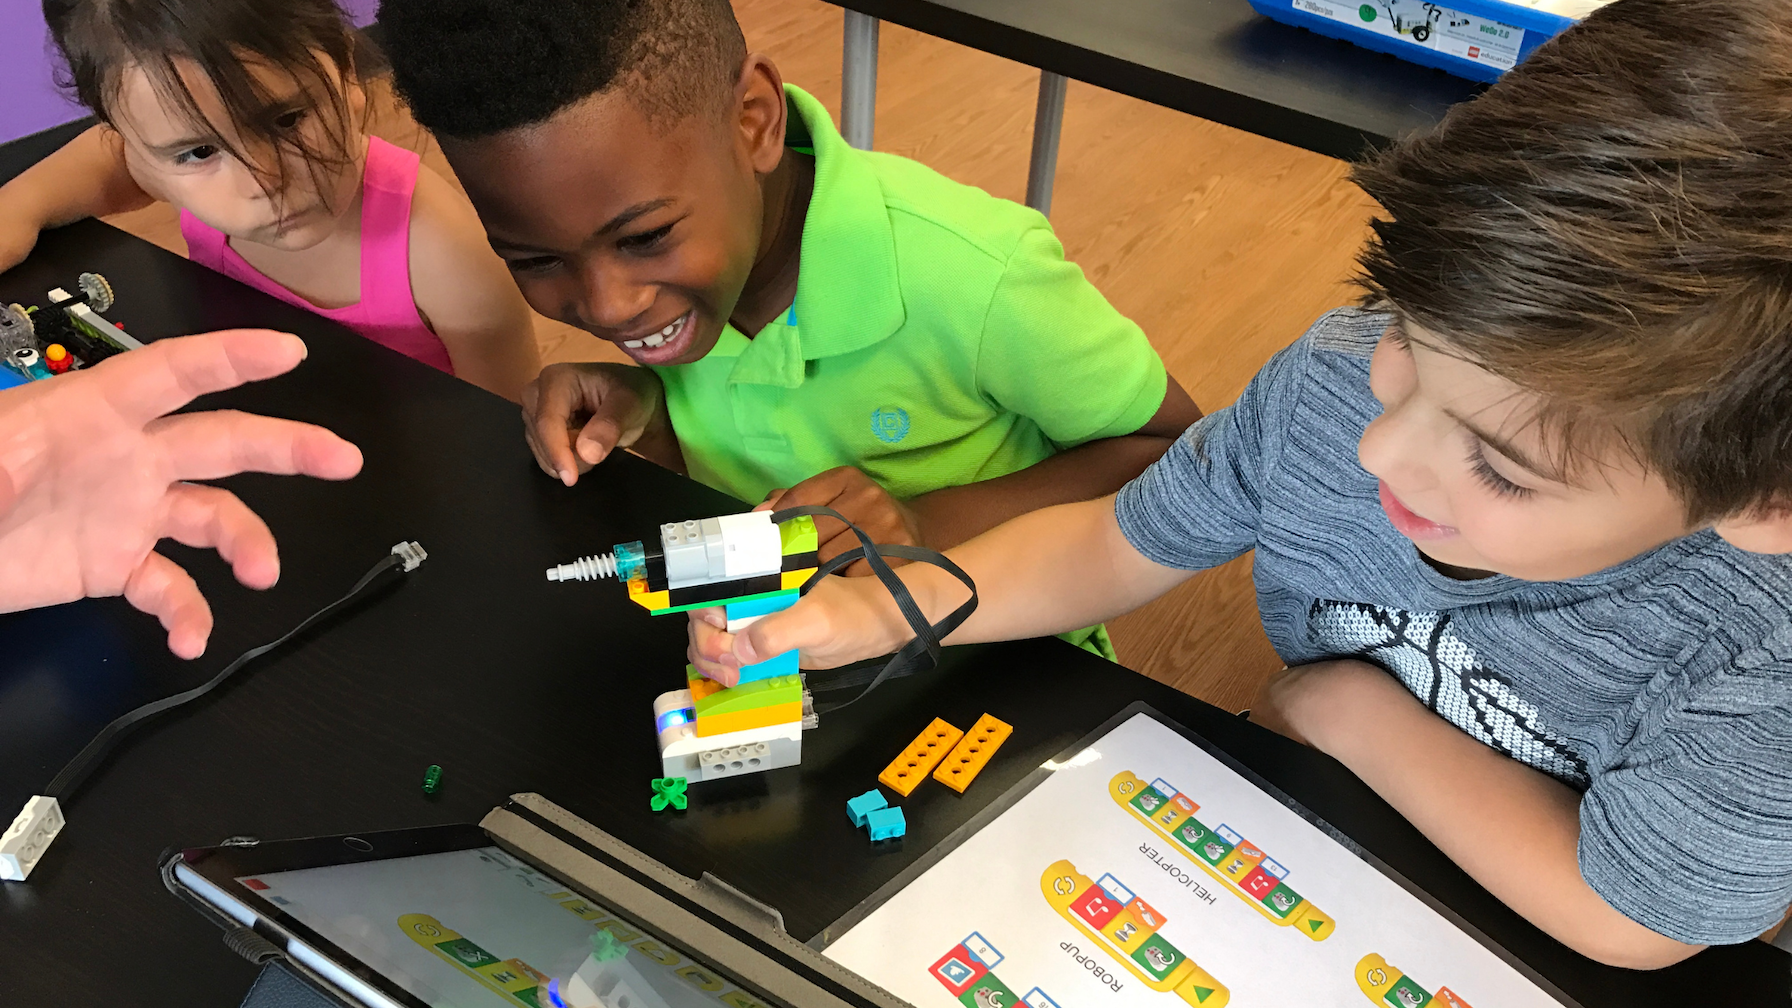 4 Robotics Programs That Will Have Your Child Hooked in McLean, VA